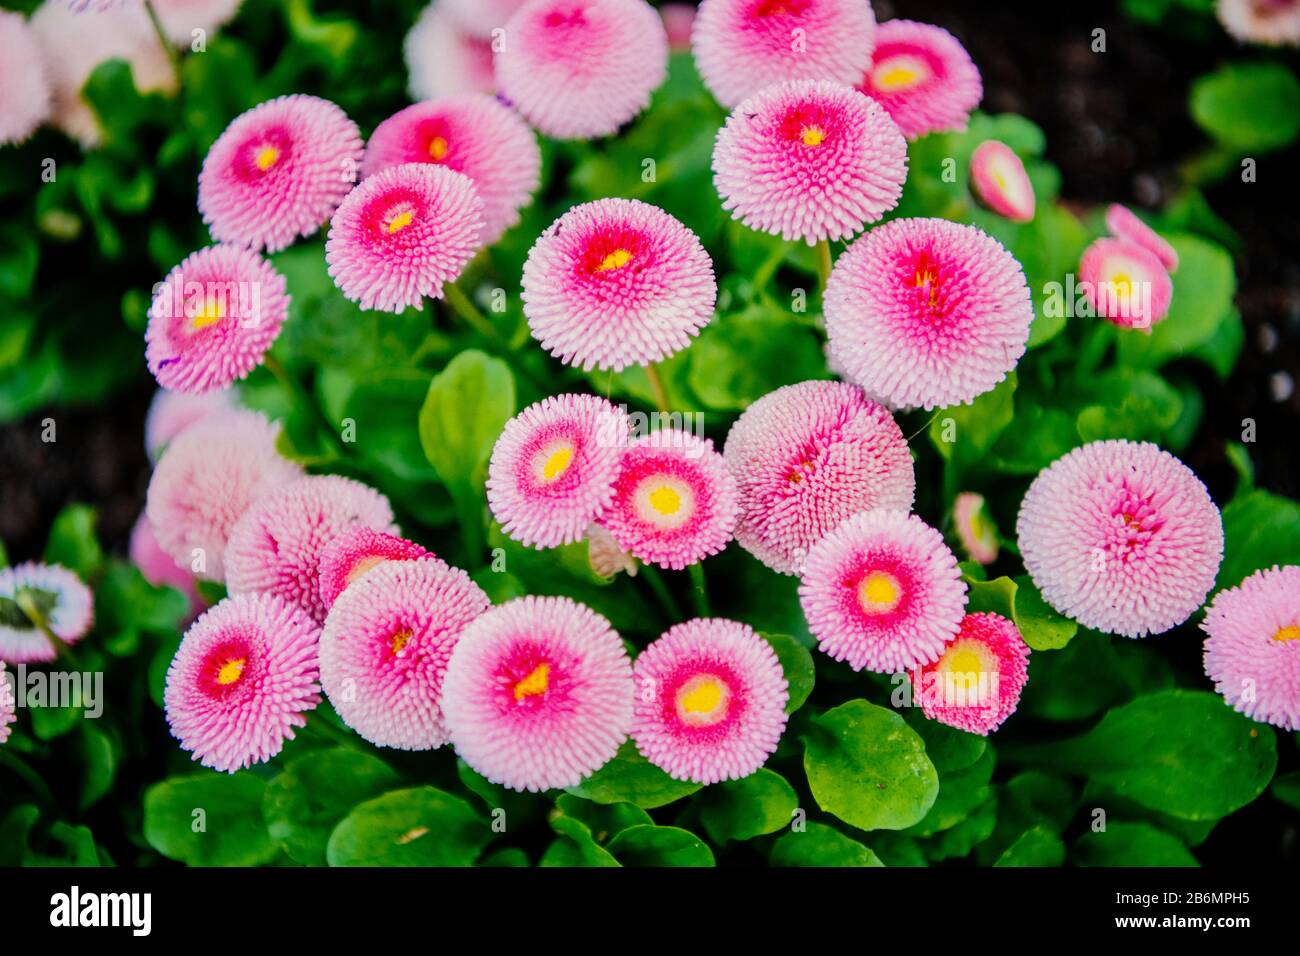 Close up of daisy flowers, Butchart Gardens, Vancouver Island, British Columbia, Canada Stock Photo